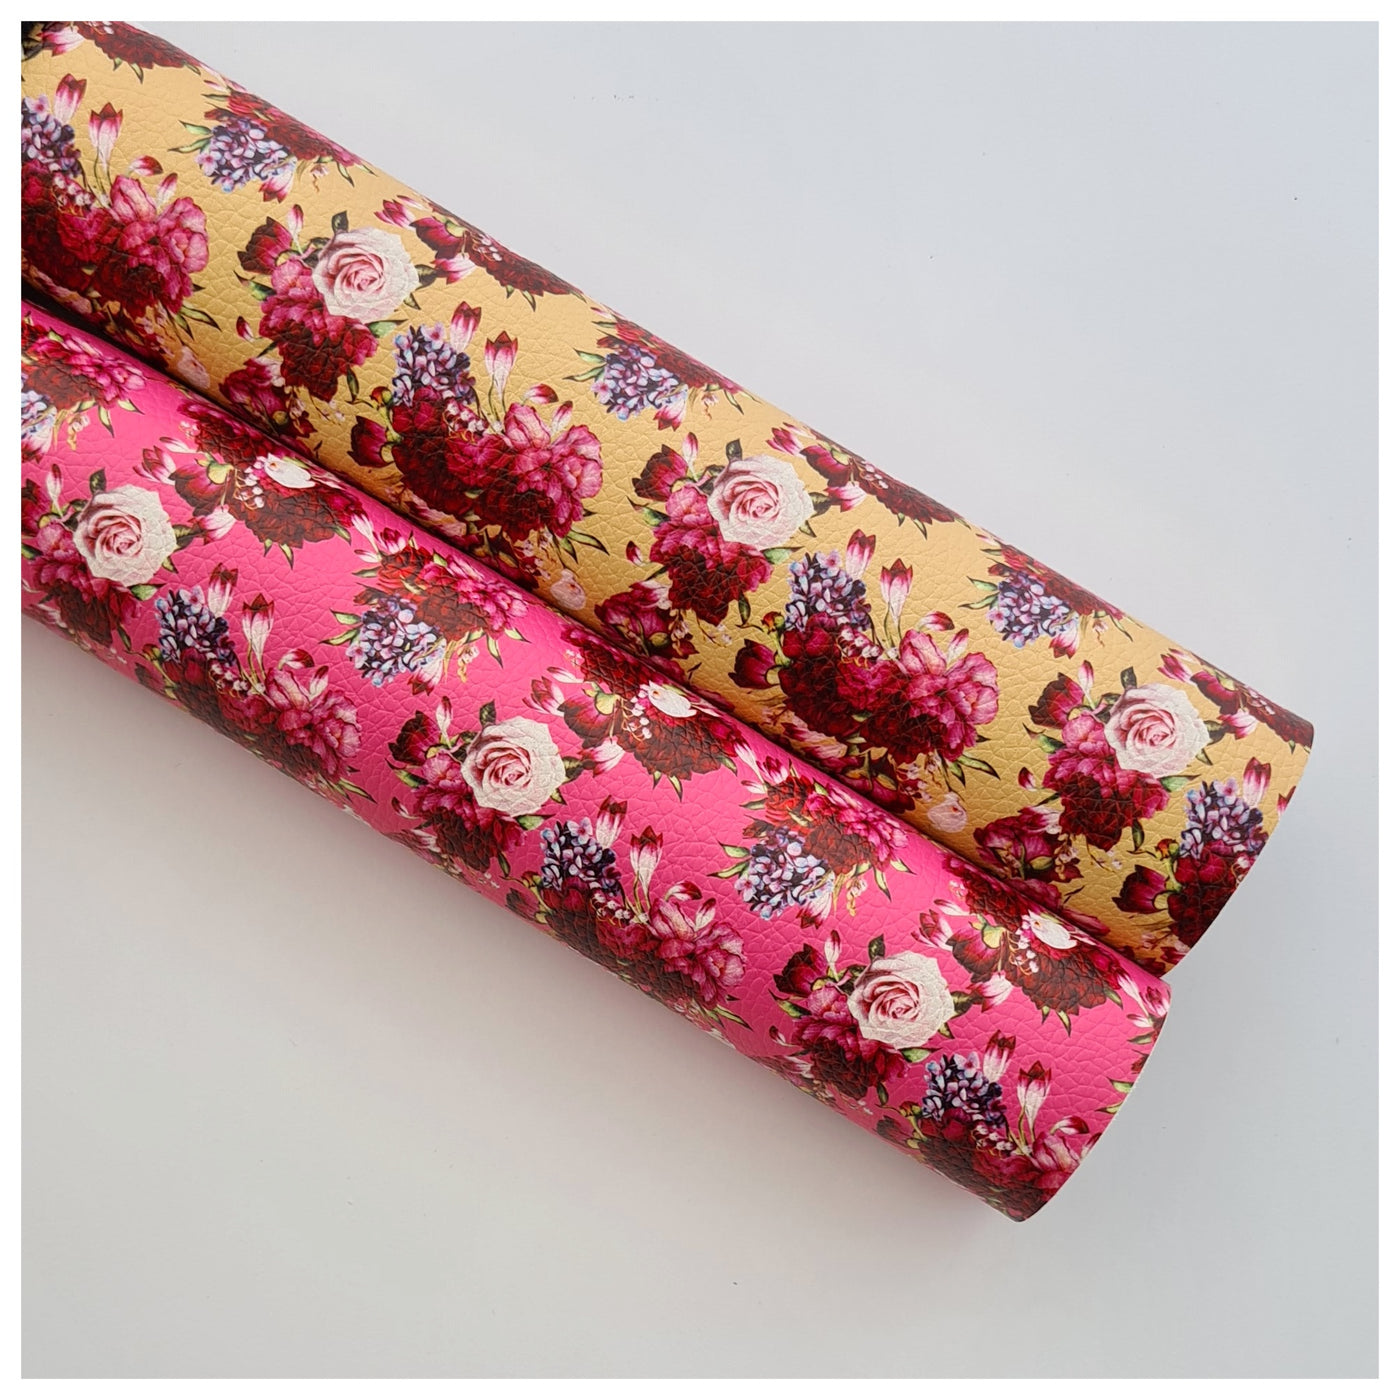 A4 Sheet of Raspberry Peonies in Bloom Litchi Leather